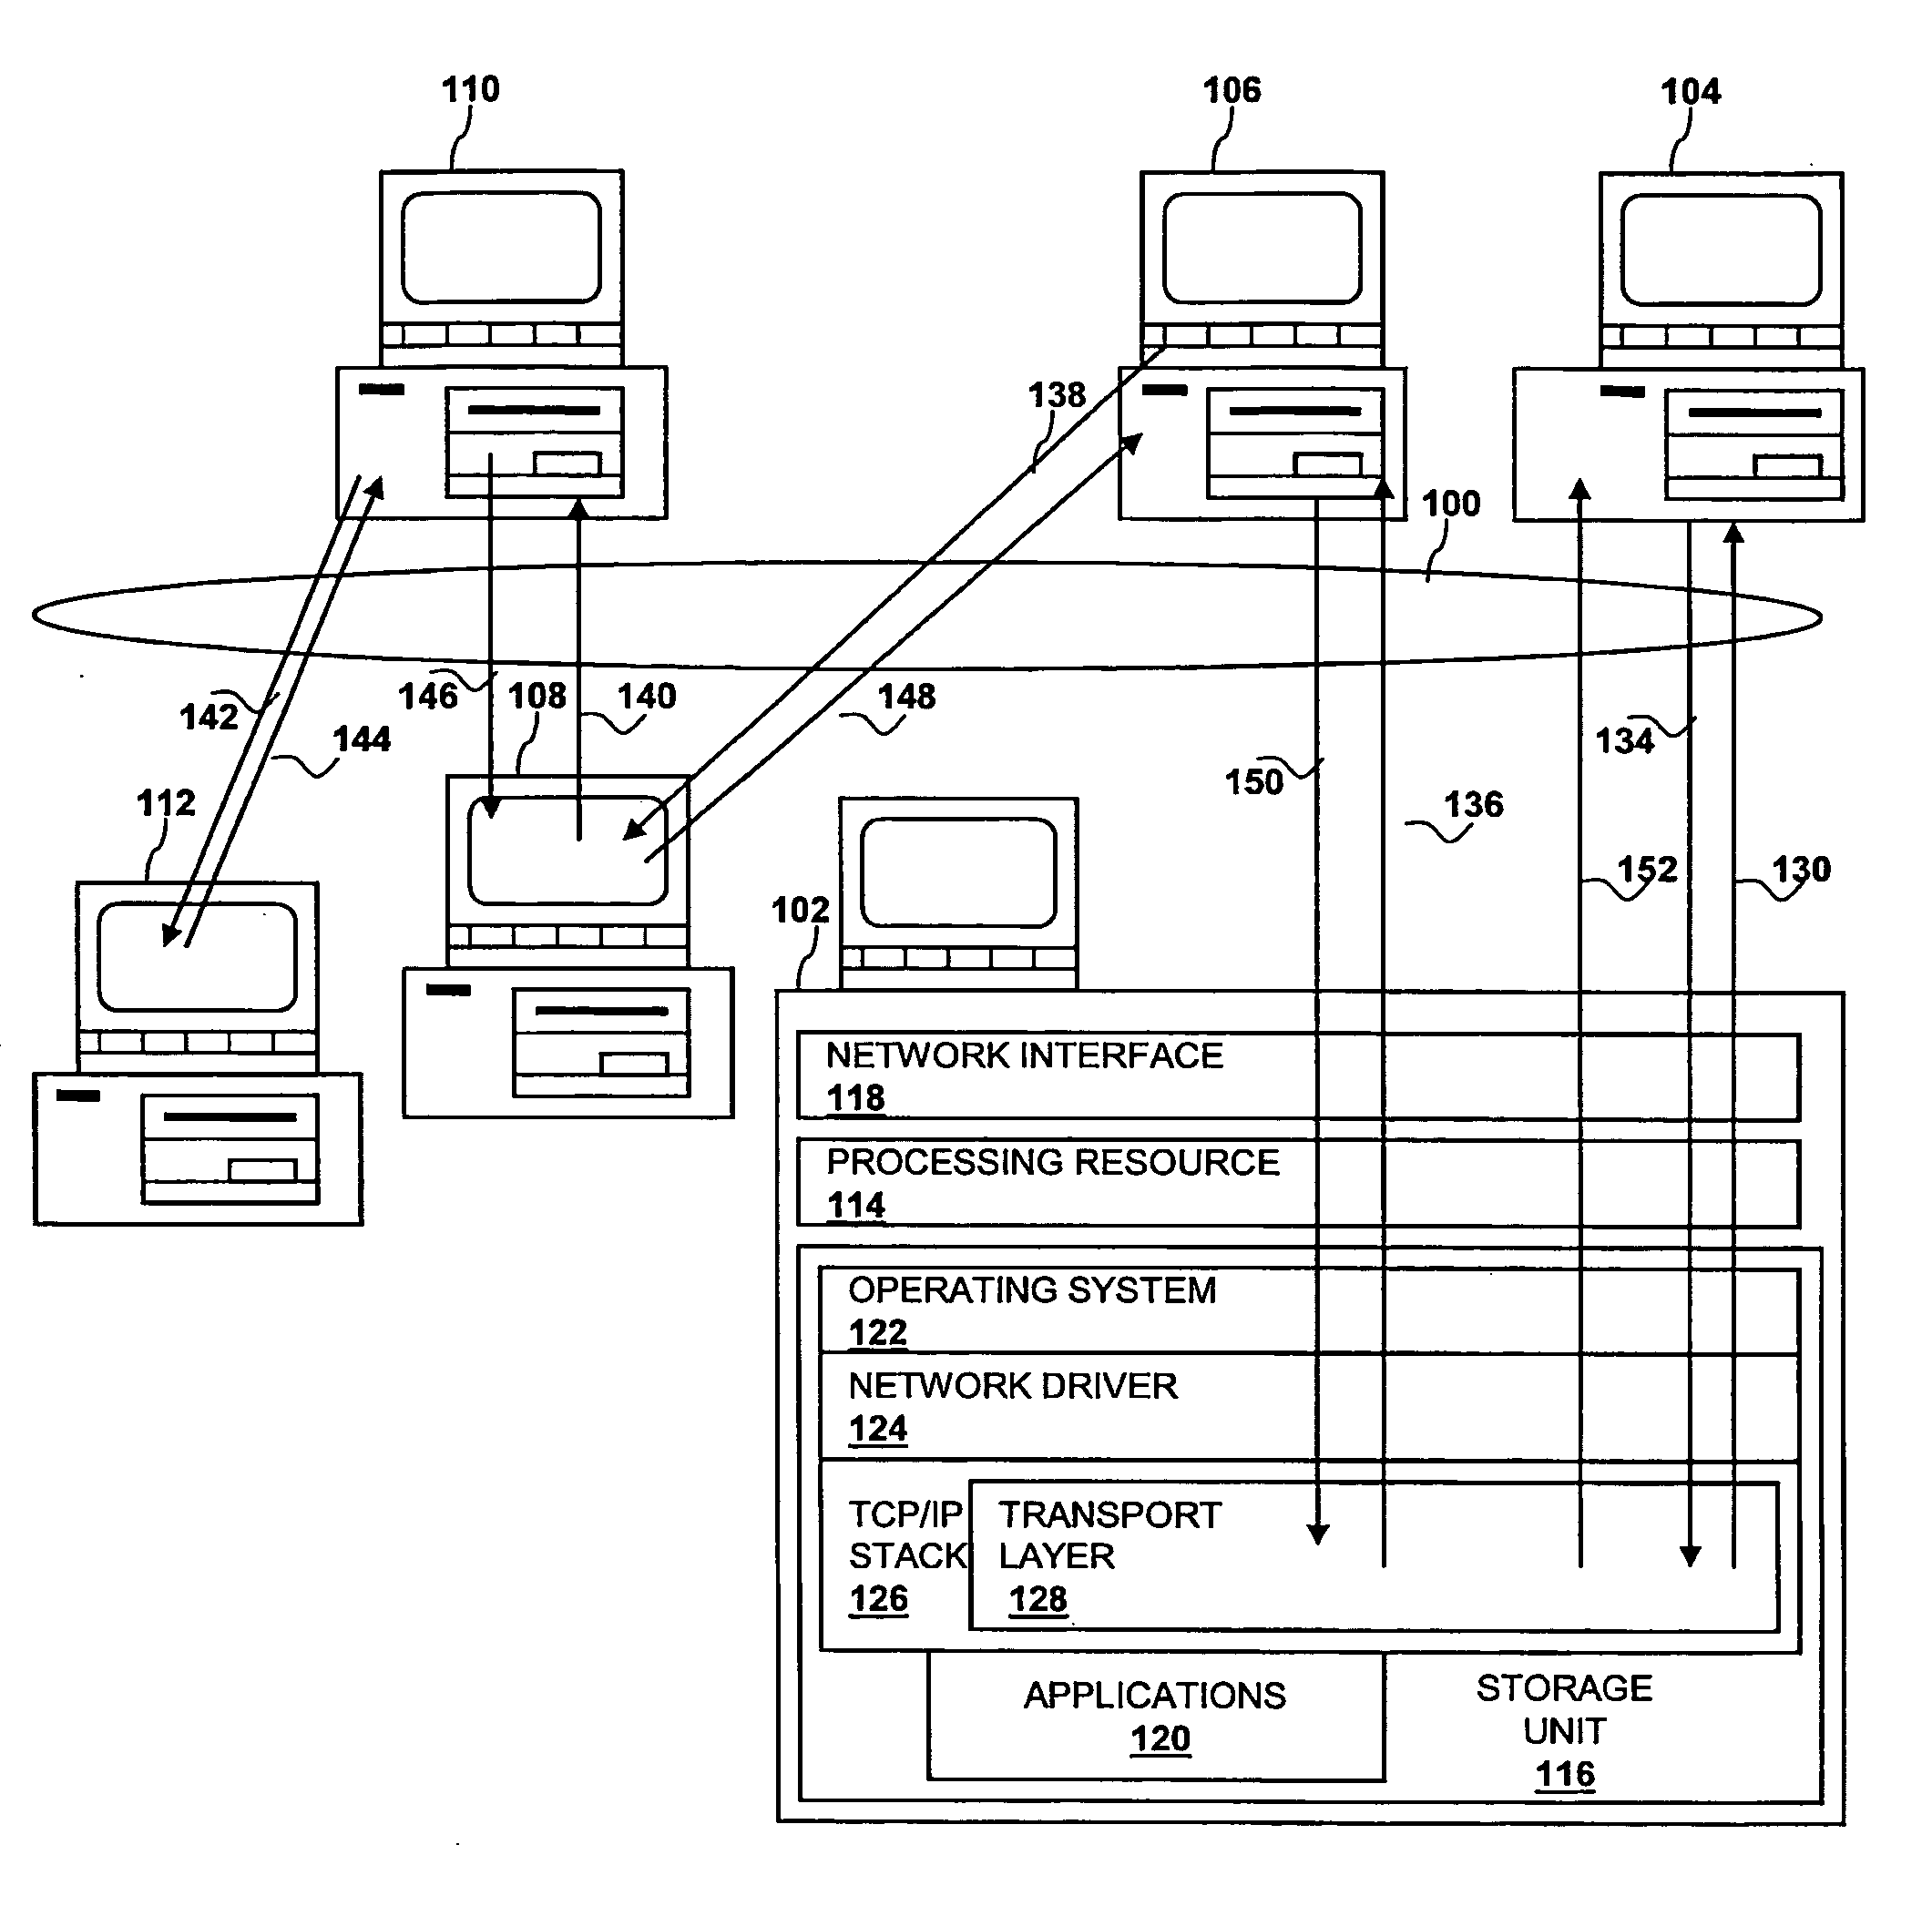 Method, system, and computer program product for remote storage and discovery of a path maximum transmission unit value on a network